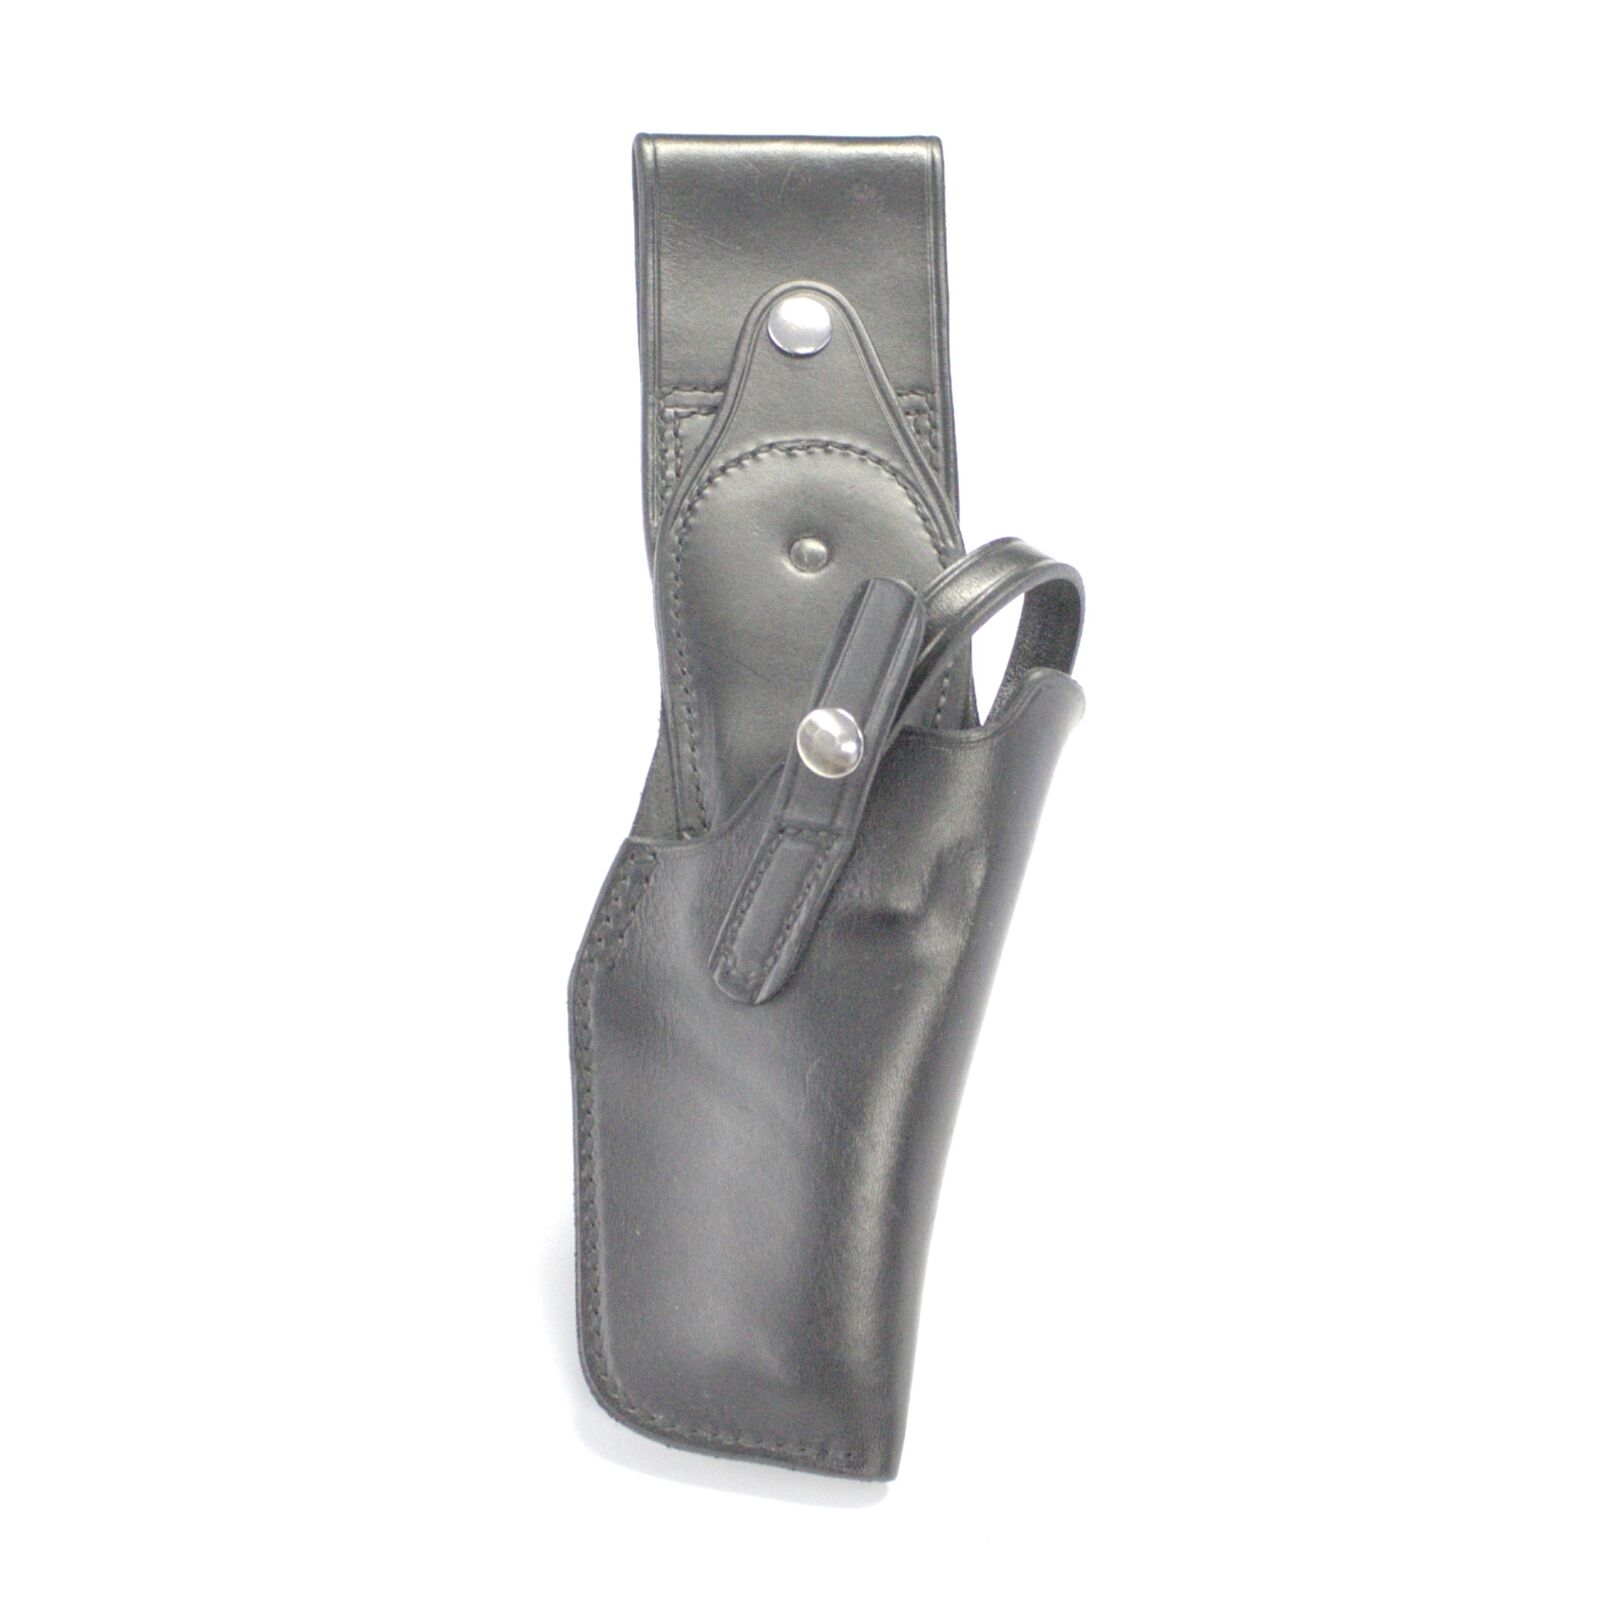 Swivel Holster fits 4-inch Revolvers including Smith & Wesson, Ruger, Colt